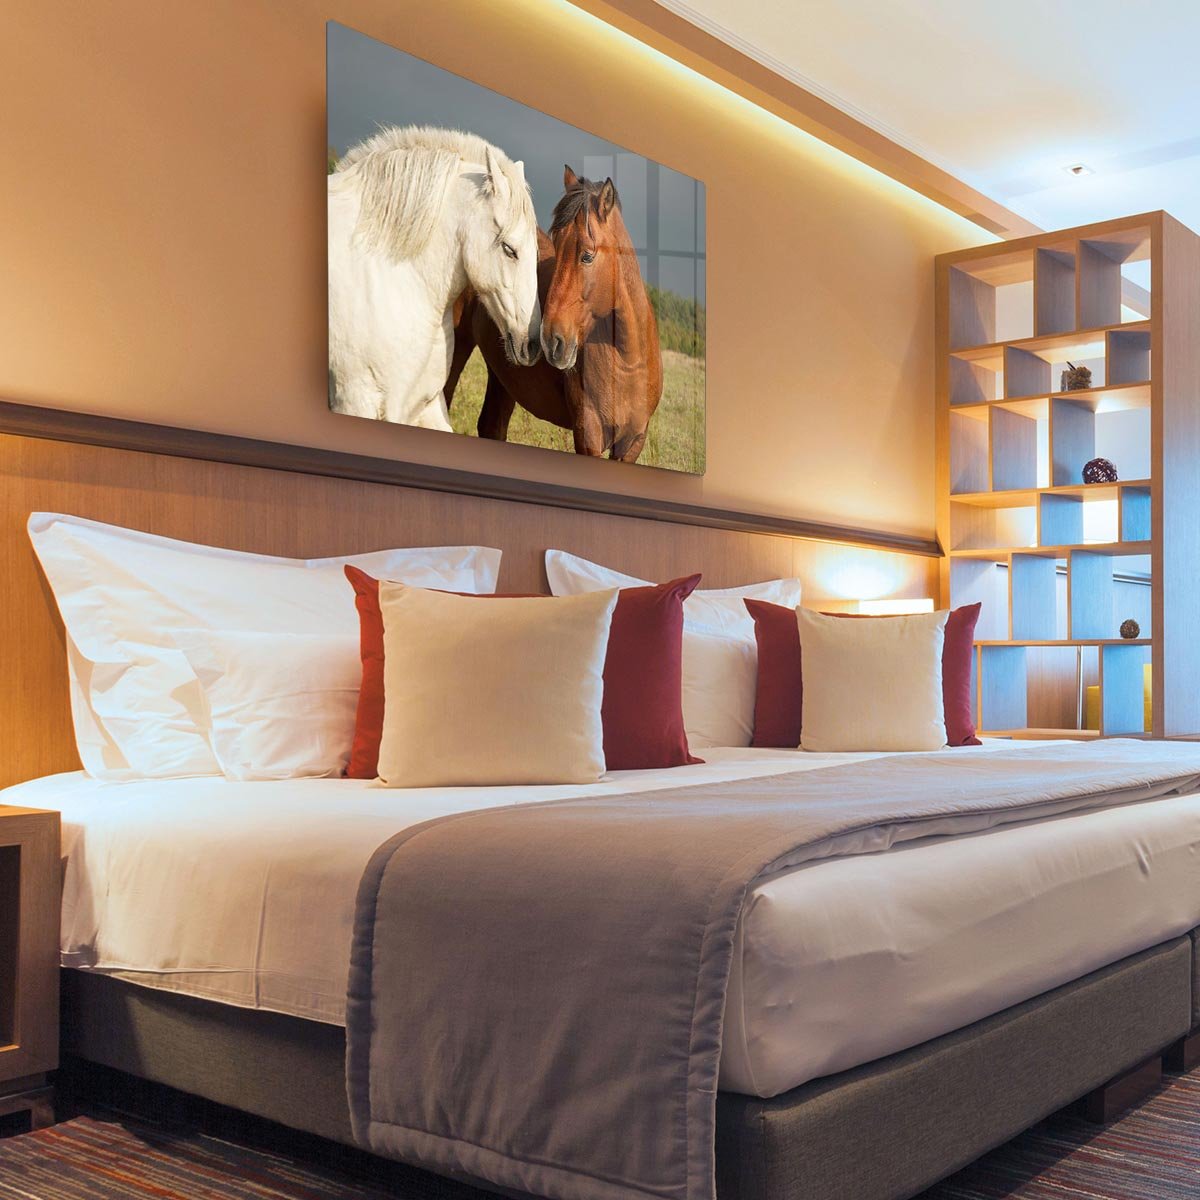 A pair of horses showing affection HD Metal Print - Canvas Art Rocks - 3